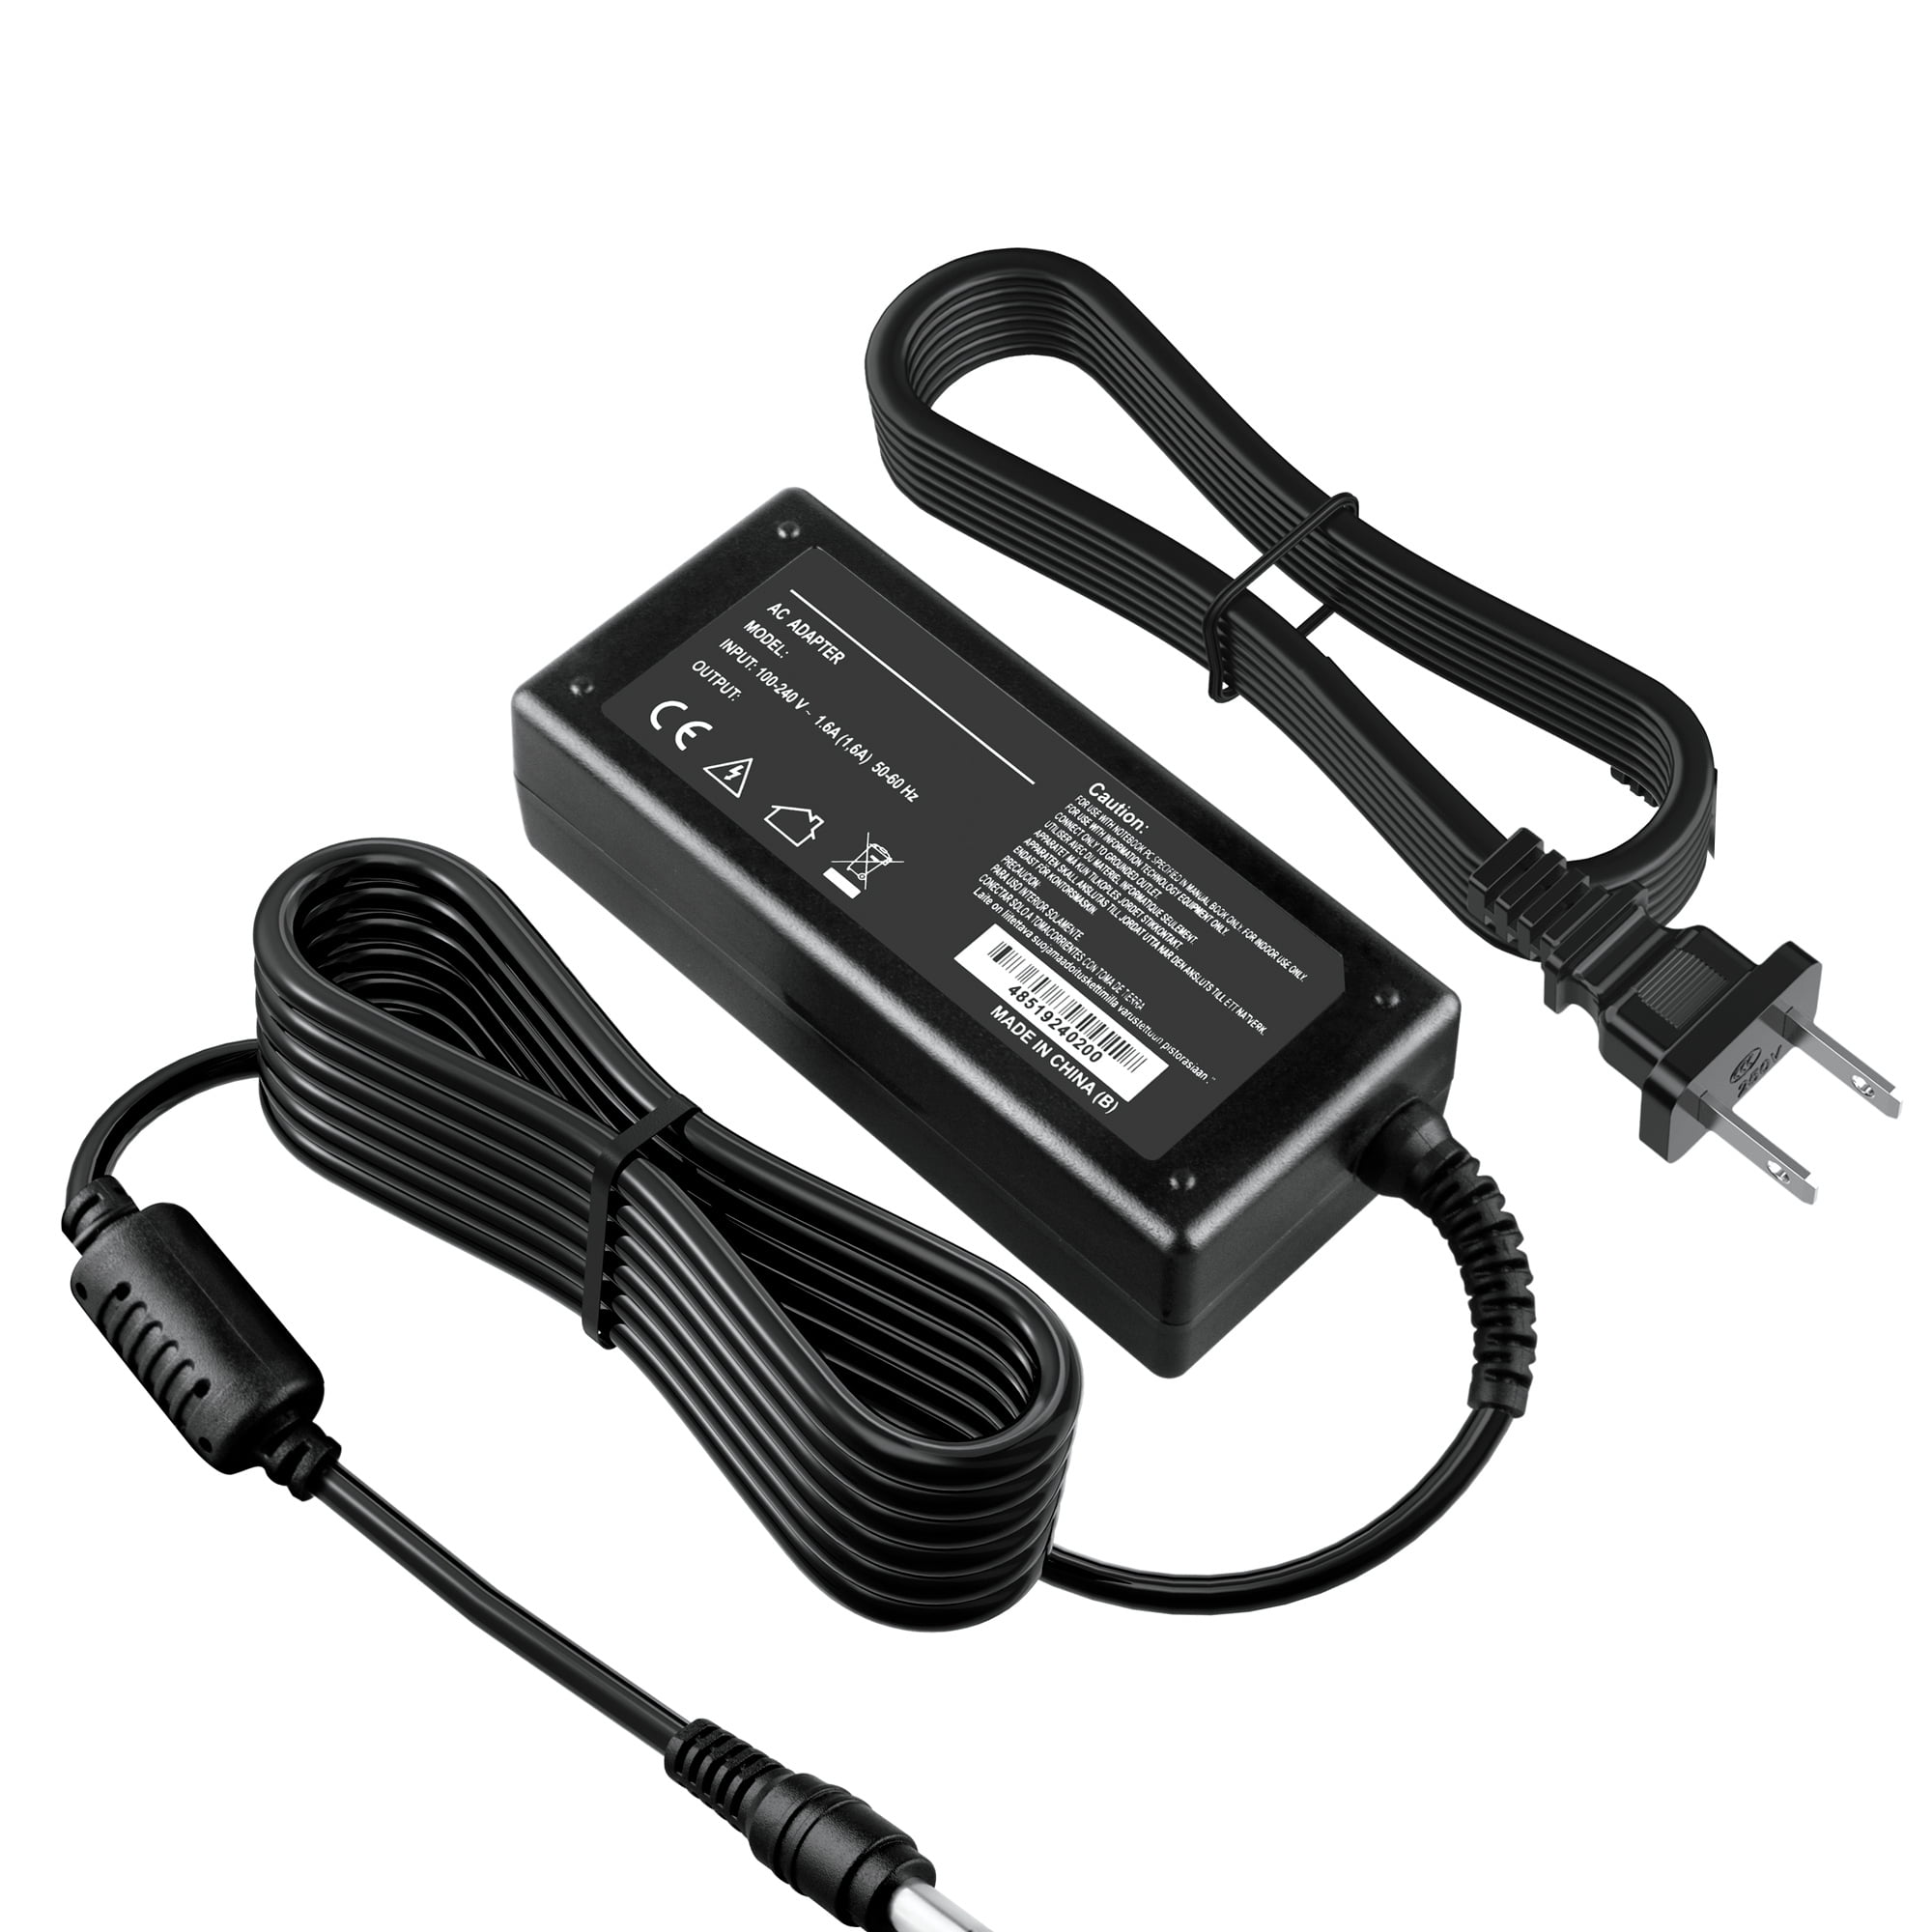 AC/DC Adapter Compatible with Great Videq Maker DC-625-1530 DC6251530  Output 15V 3.0A Input 100-240V~50/60Hz 1.2A MAX GVM RGB LED Studio Video  Light Kit Power Supply Charger 